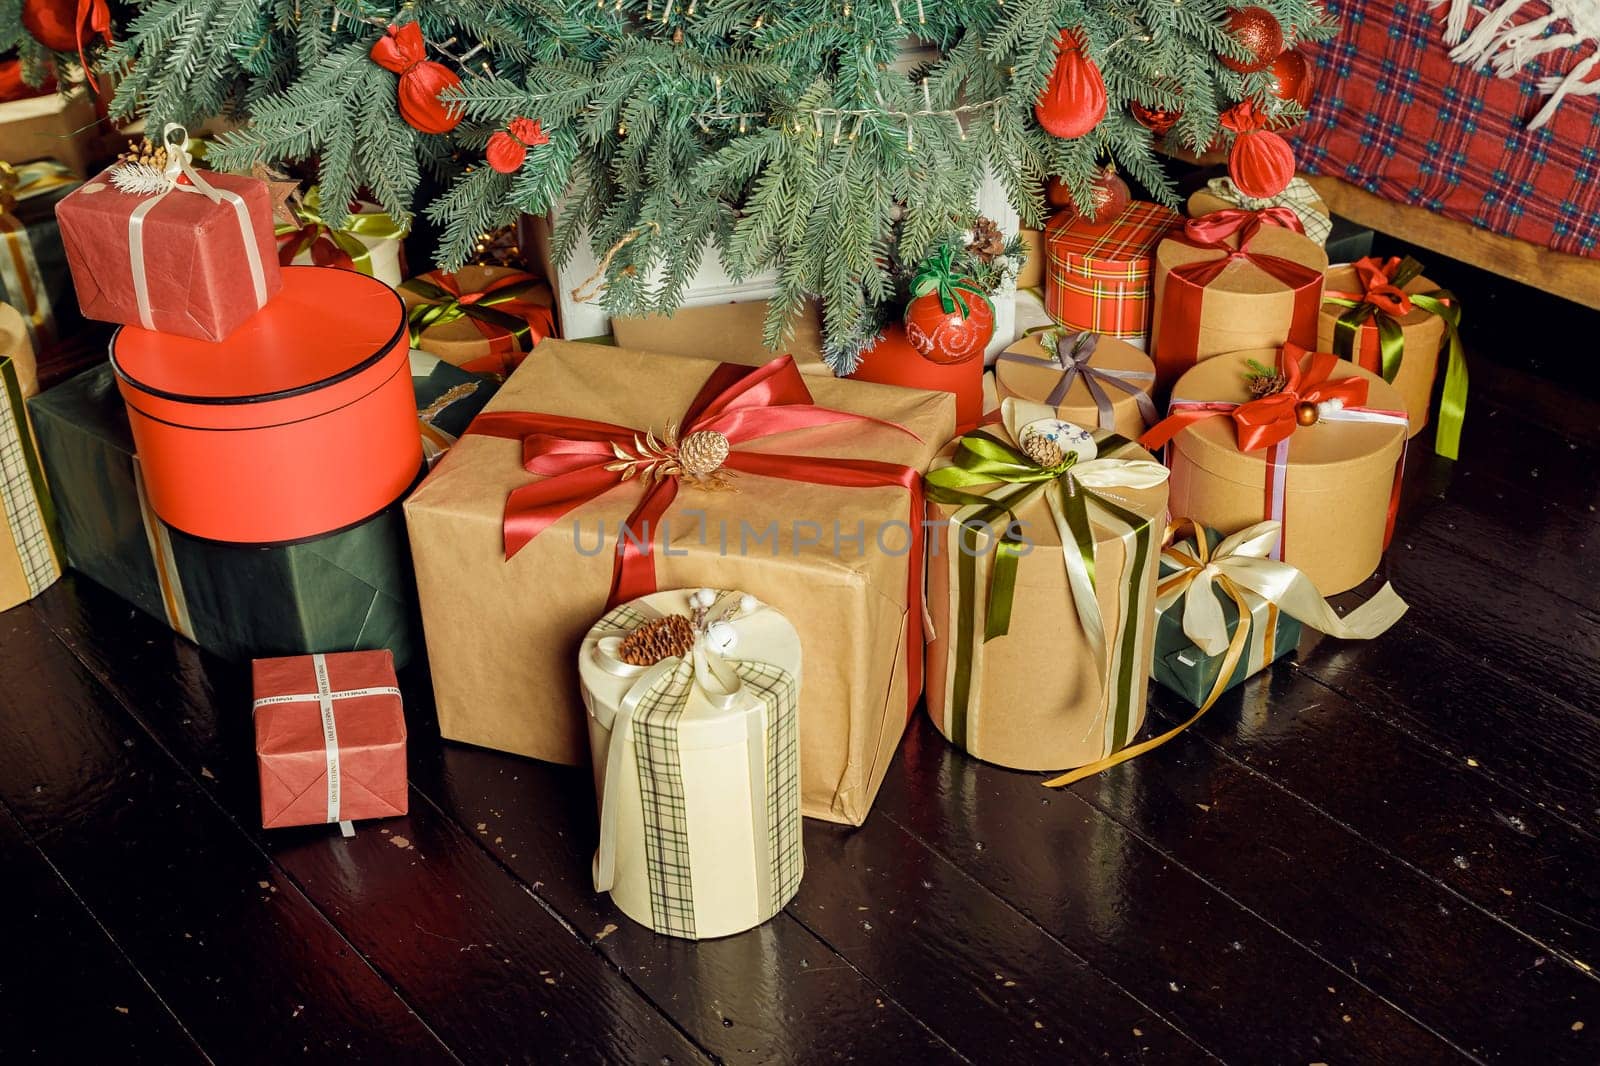 Christmas background with many gift boxes decorated with ribbon on floor under Christmas tree. Winter holidays concept. stack of Boxes with gifts under the Christmas tree by YuliaYaspe1979